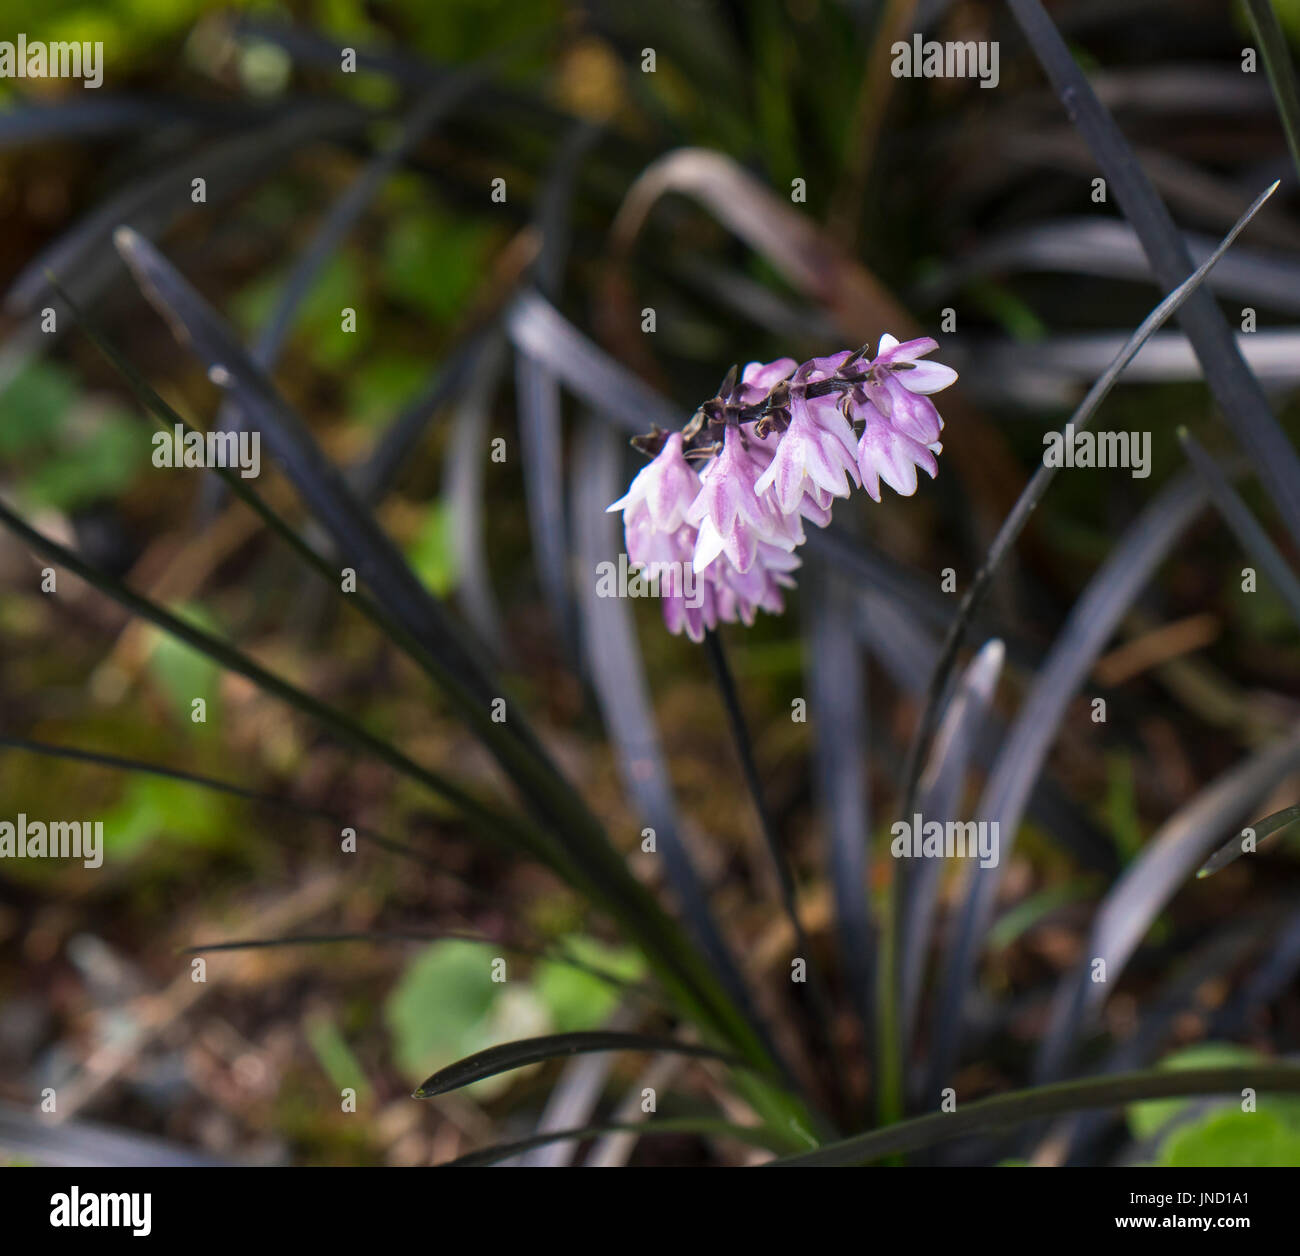 A raceme of lavender-pink flowers emerges from a tuft of Black Mondo Grass (Ophiopogon planiscapus 'Nigrescens'). Stock Photo